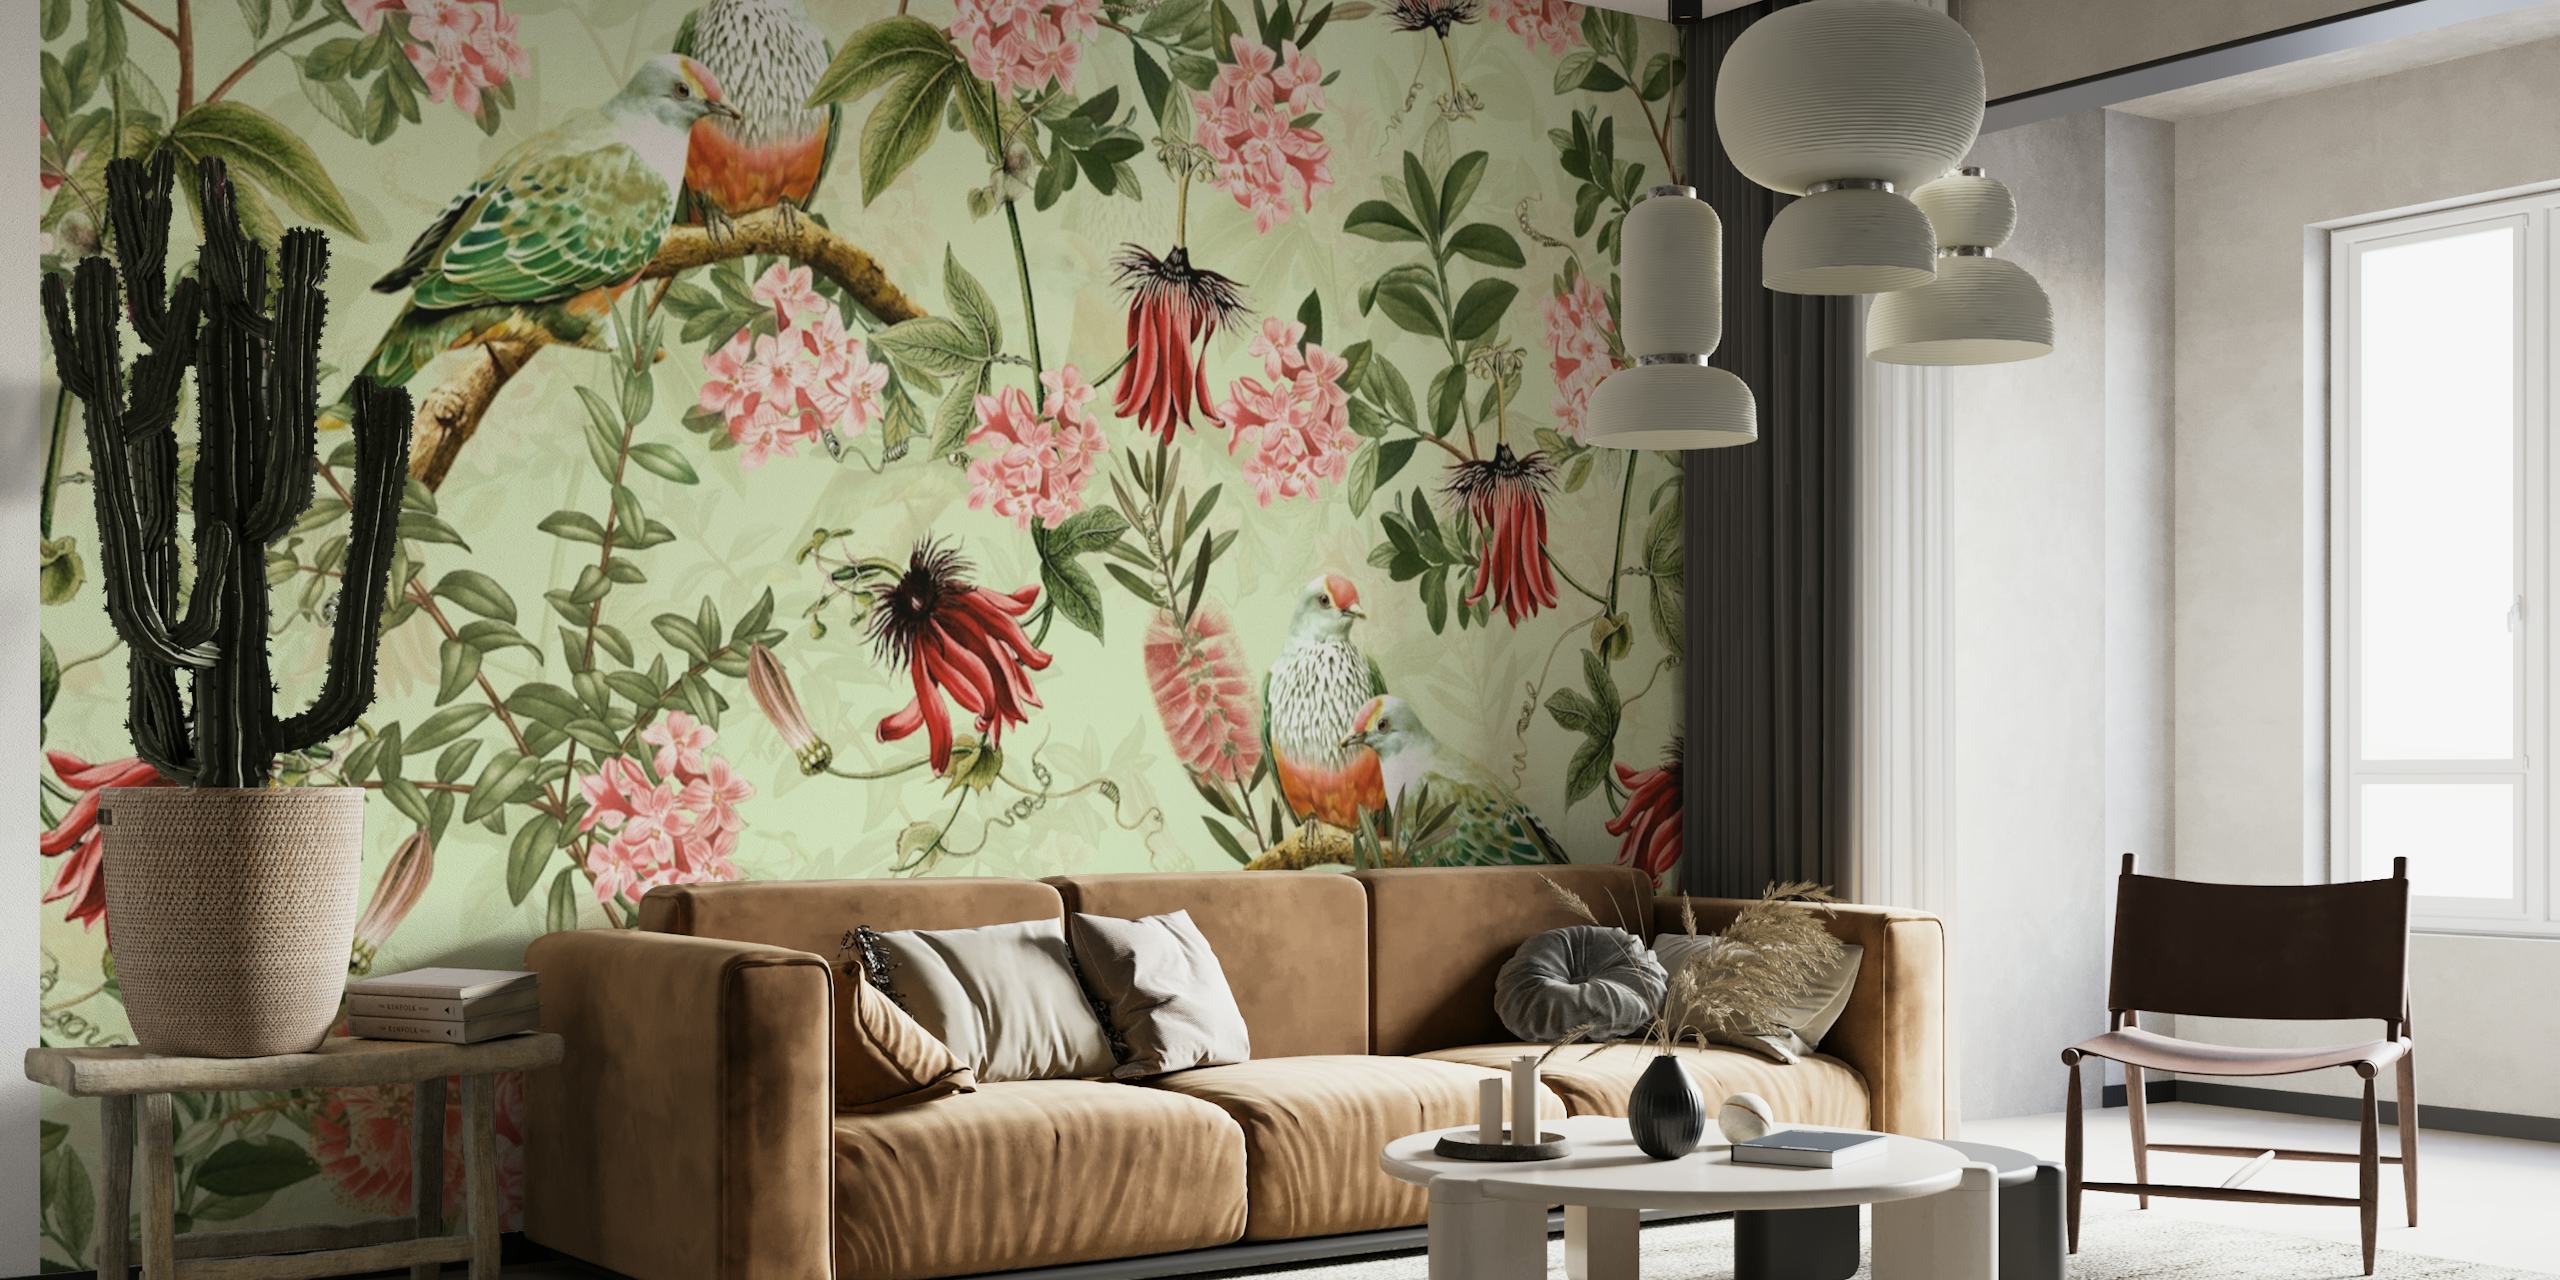 Exotic Birds And Passionflowers 1 wallpaper